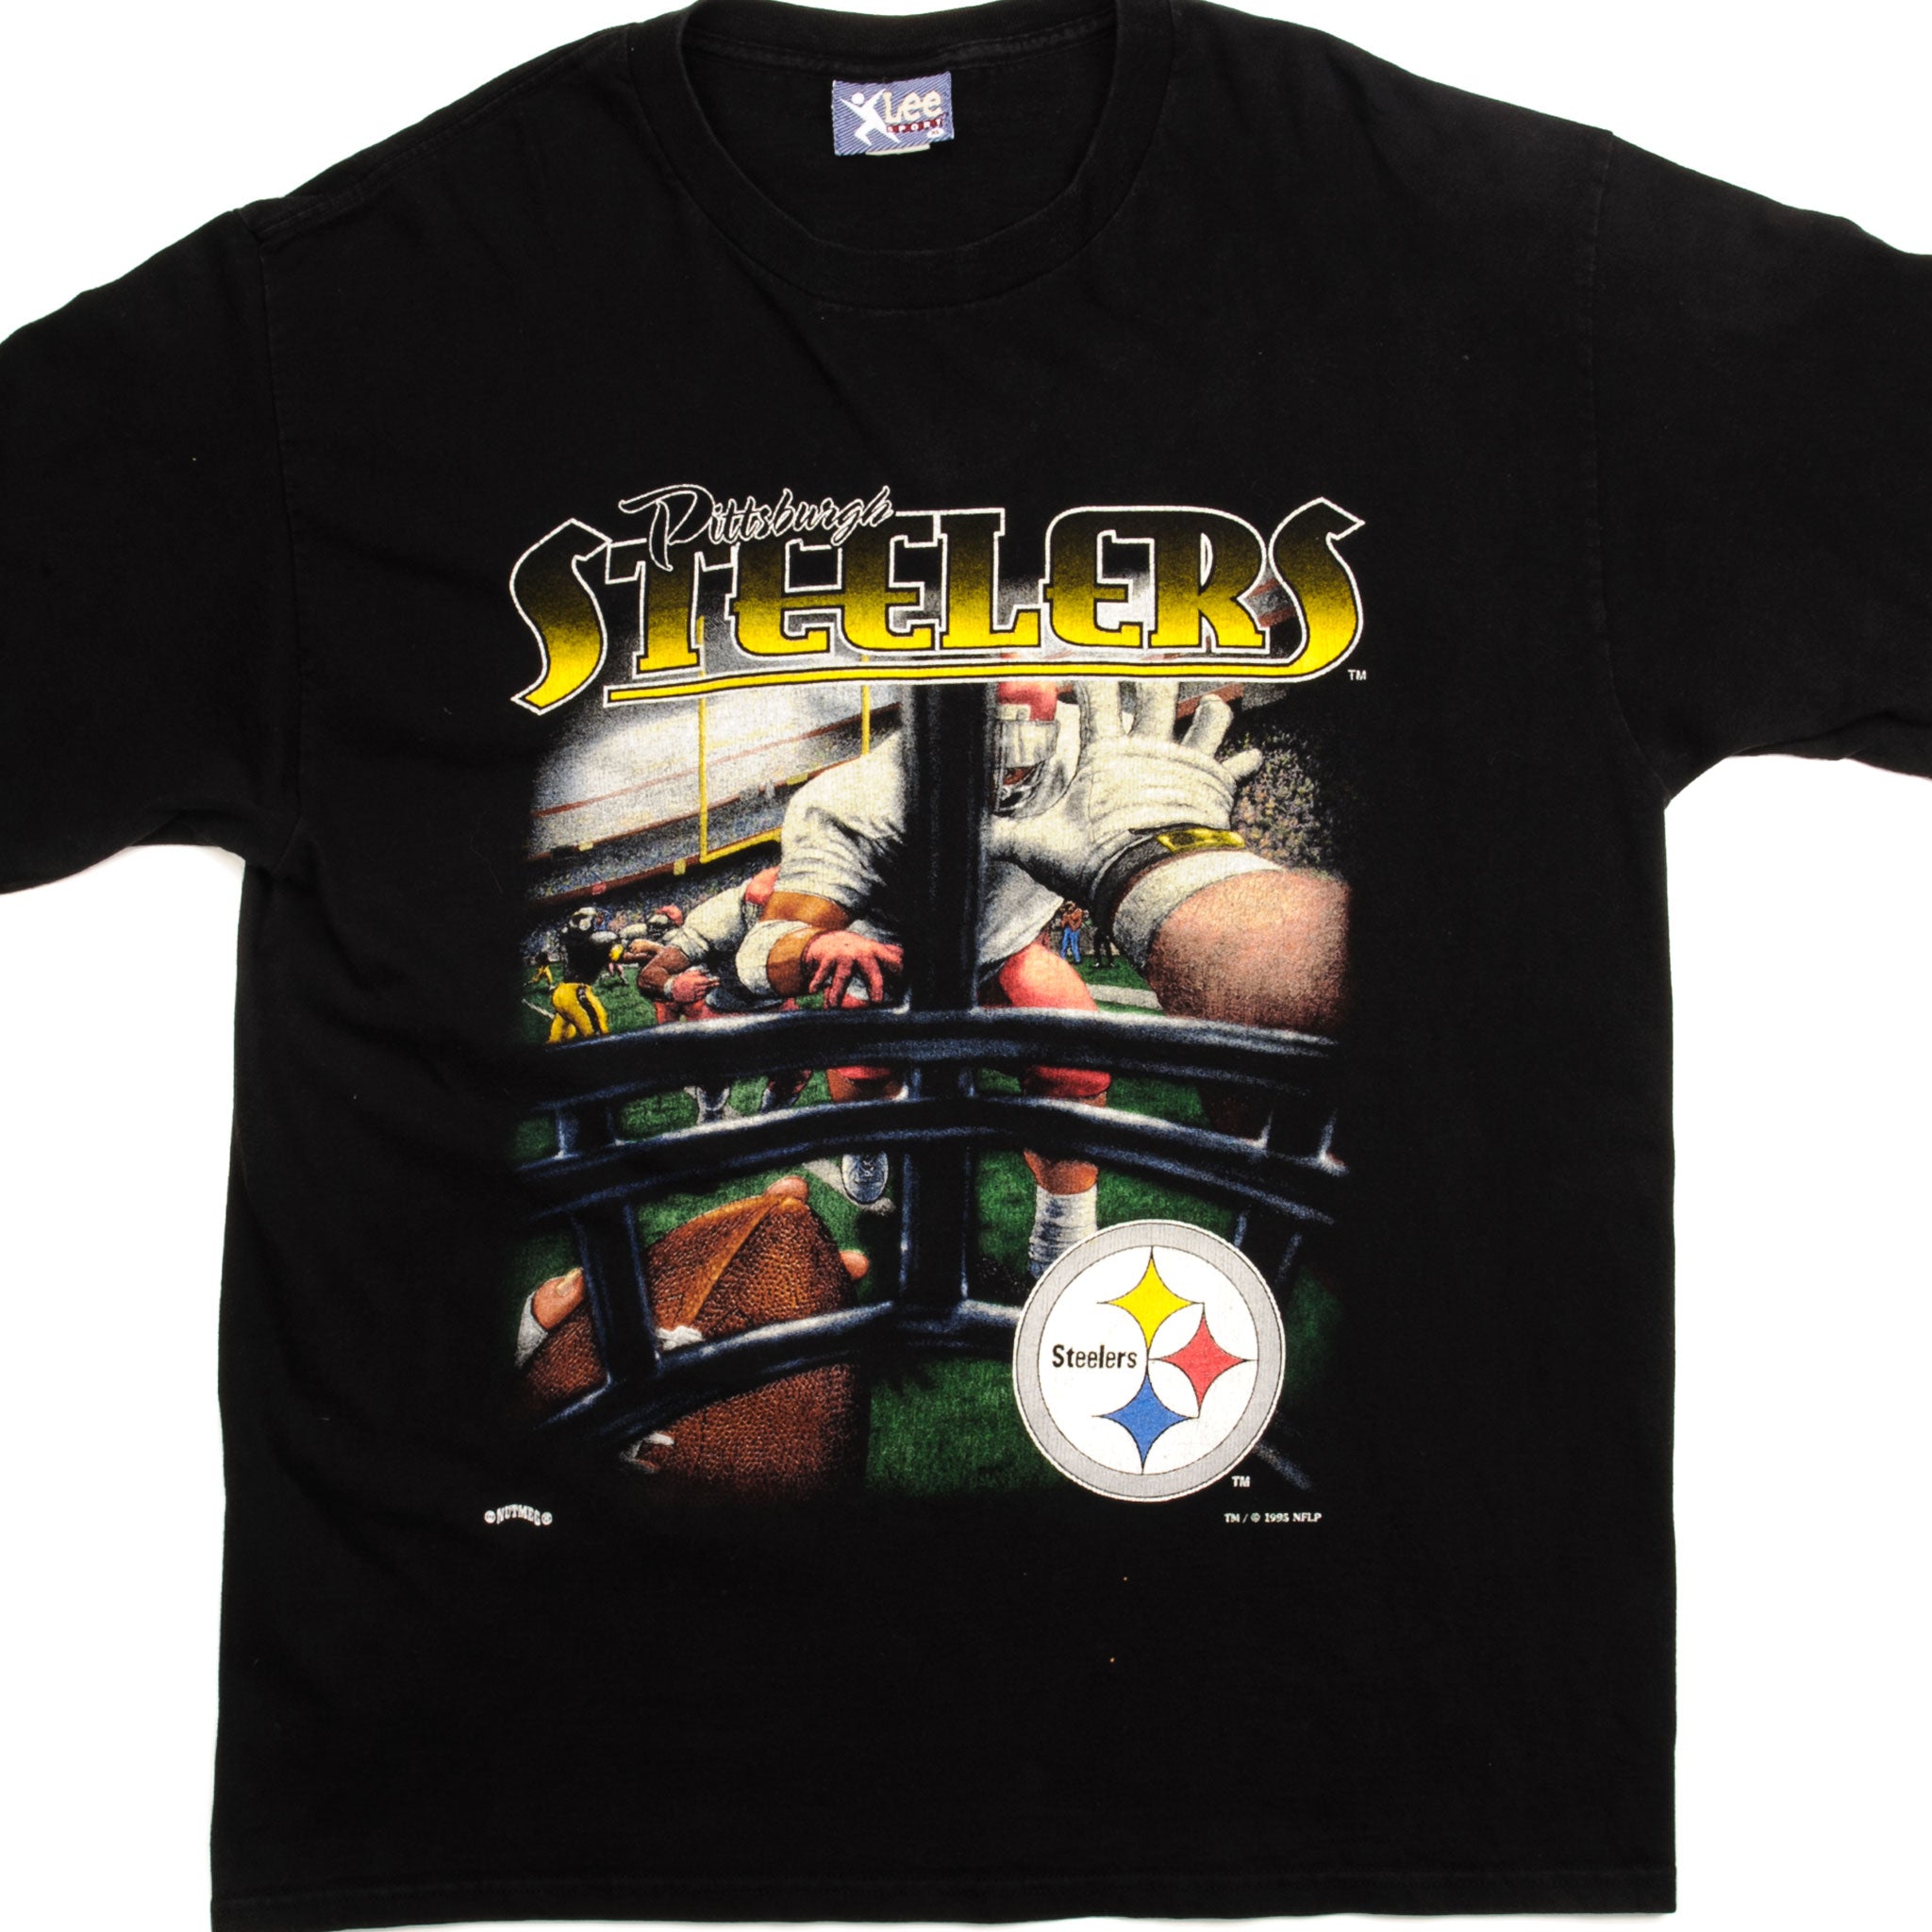 Vintage NFL Pittsburgh Steelers Tee Shirt 1995 Size XL Made in USA